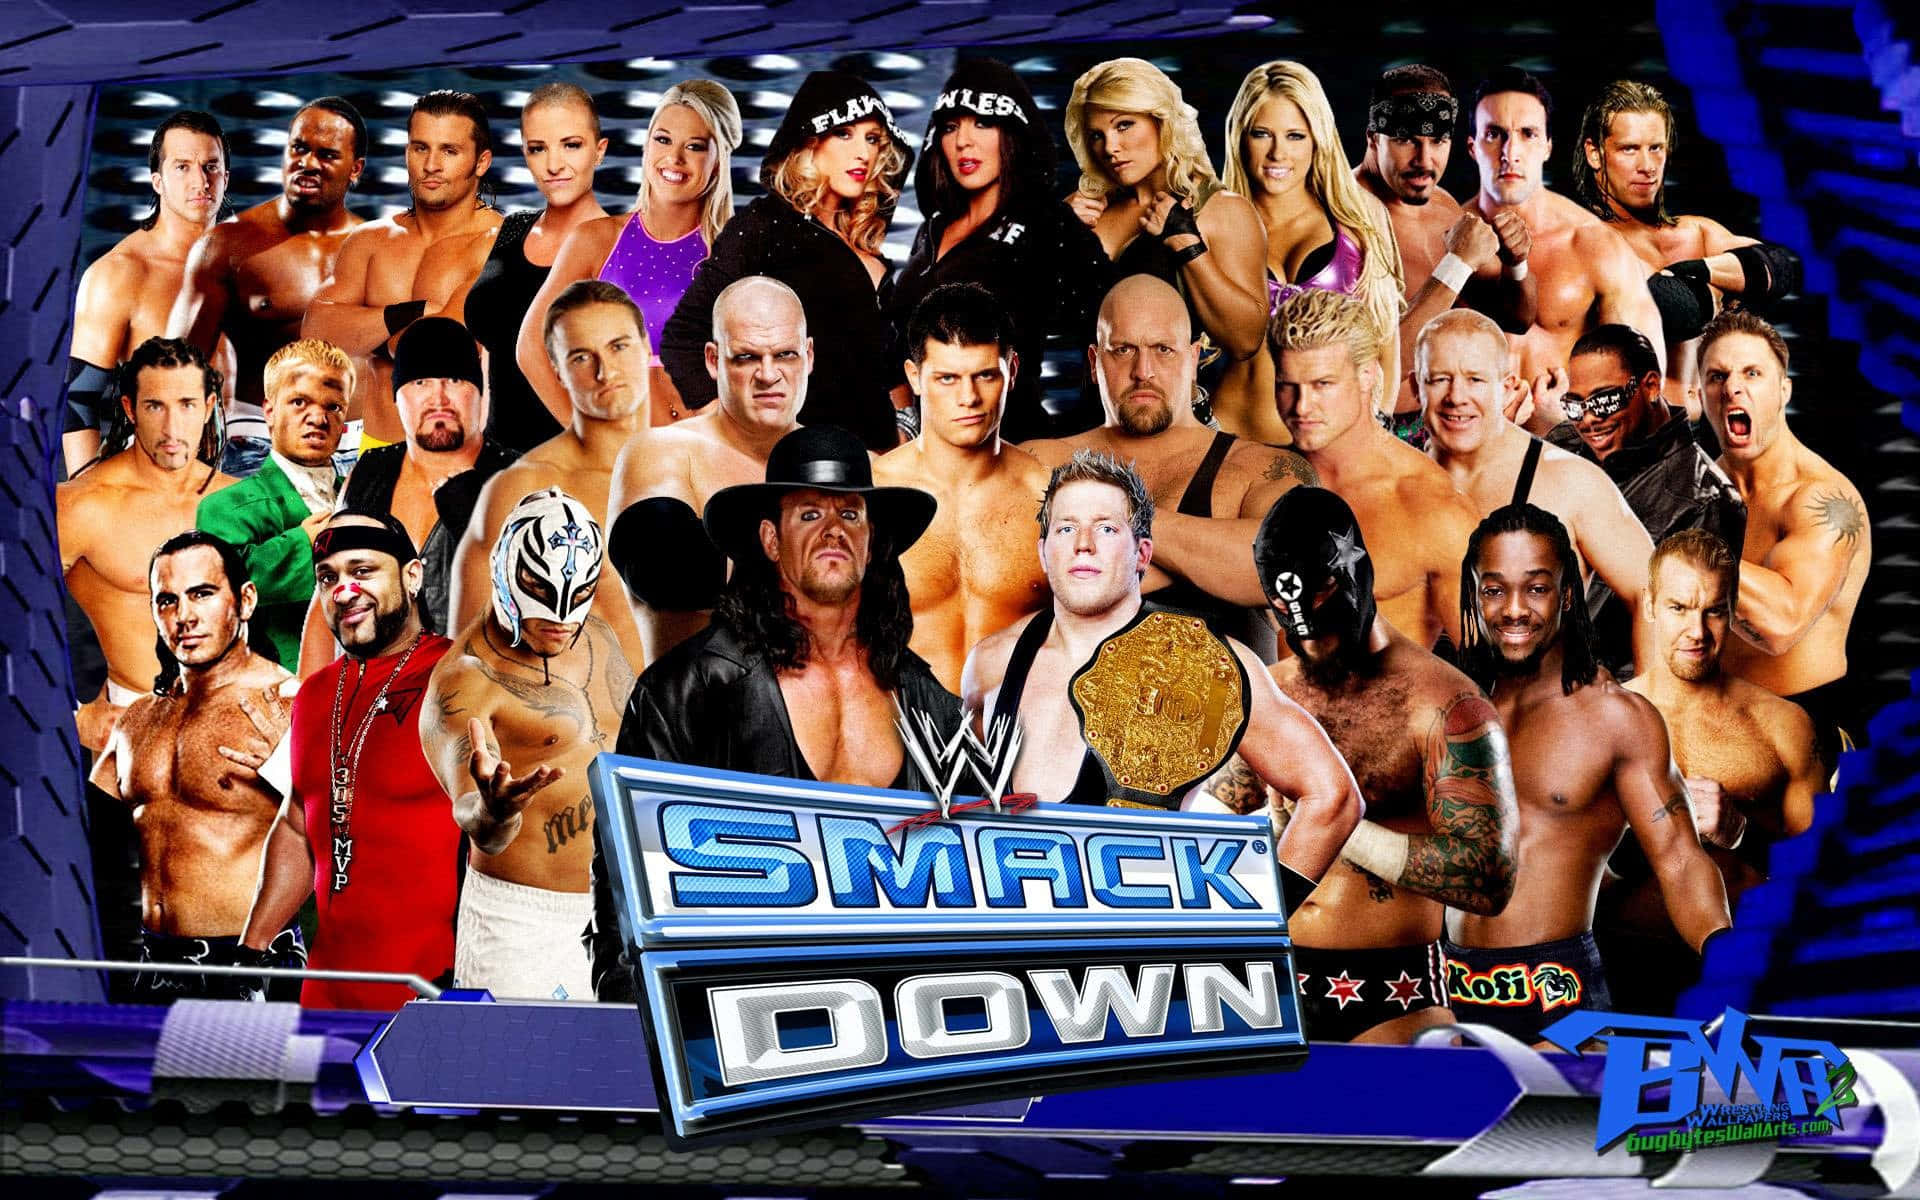 “Represent your brand and take the crown in Wrestlemania Smackdown!" Wallpaper